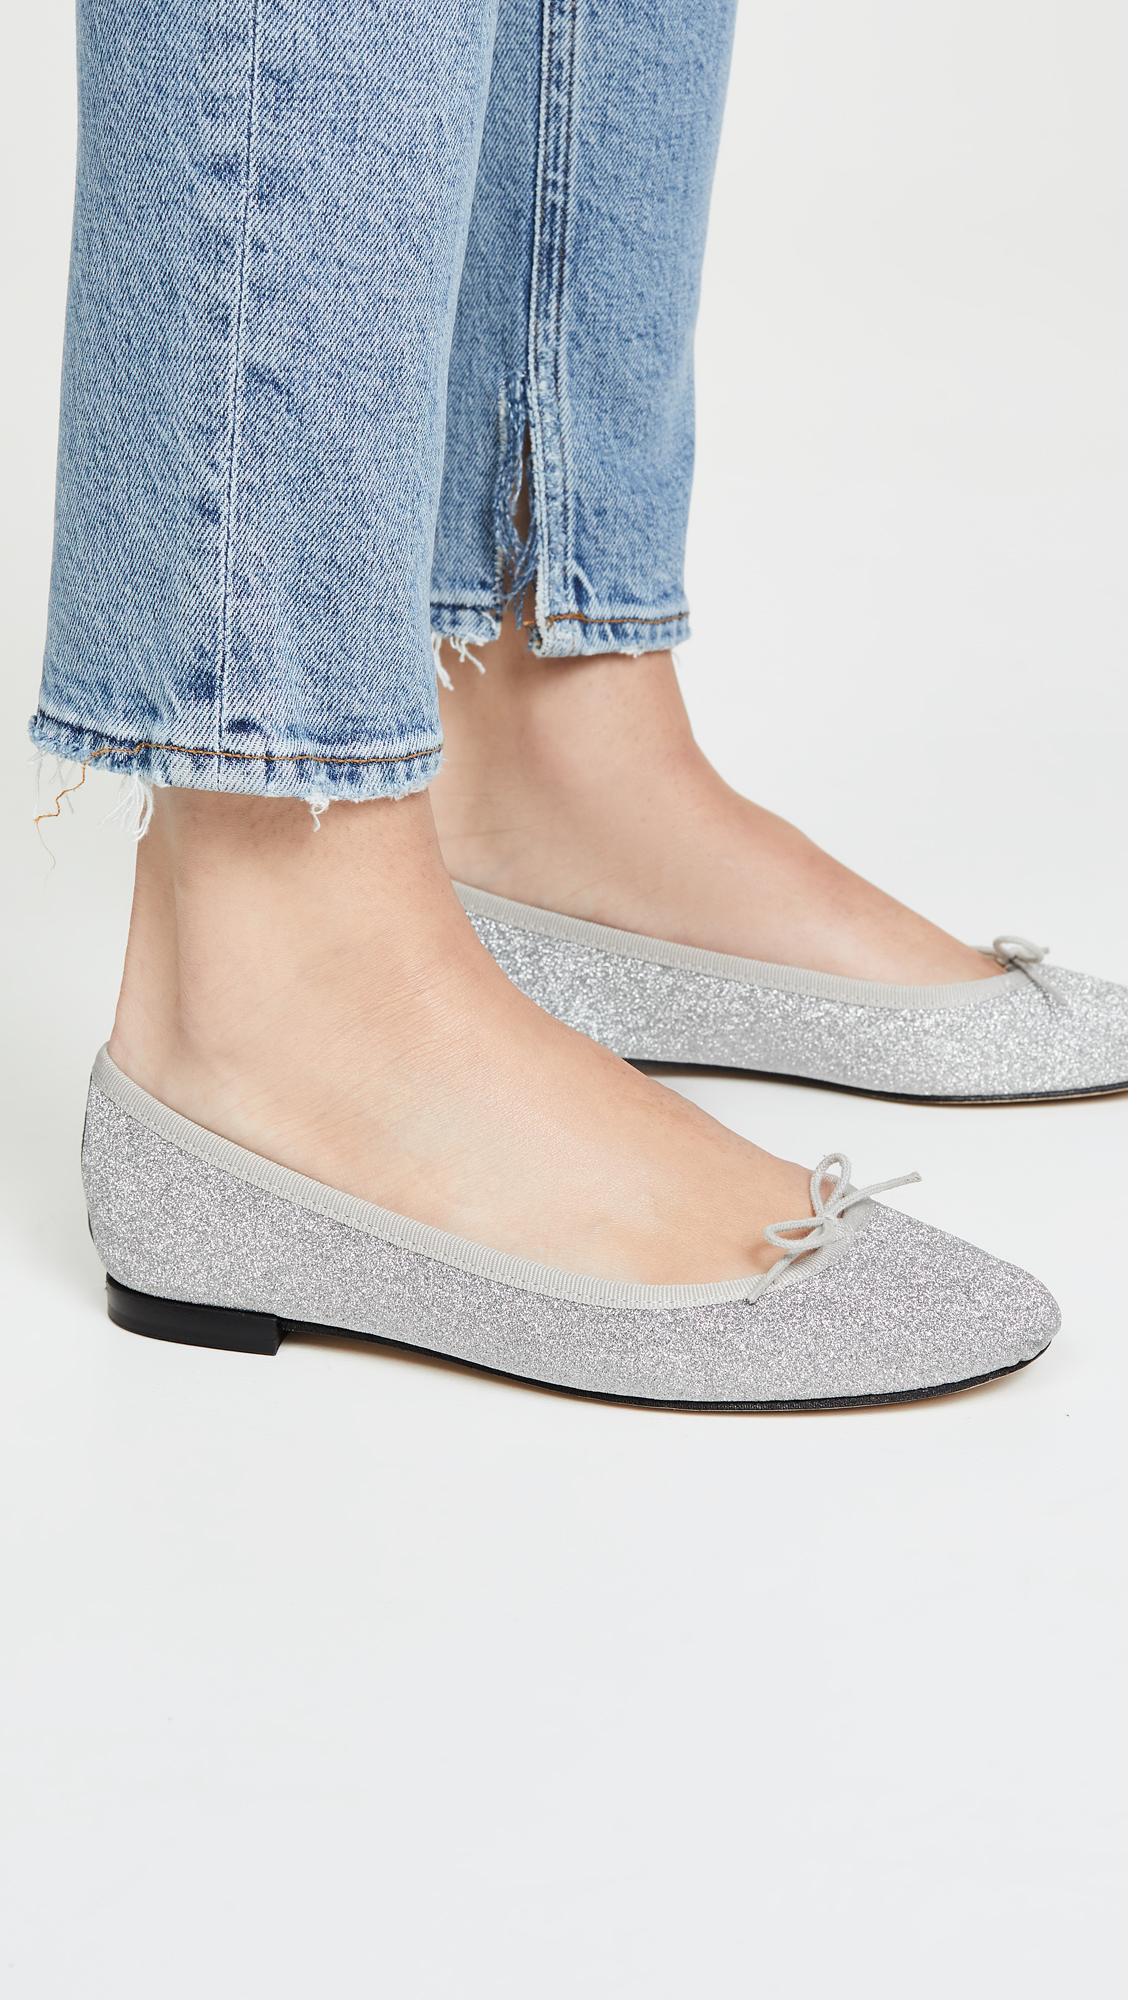 The Daily Hunt: Sparkly Silver Ballet Flats and more! - Katie 